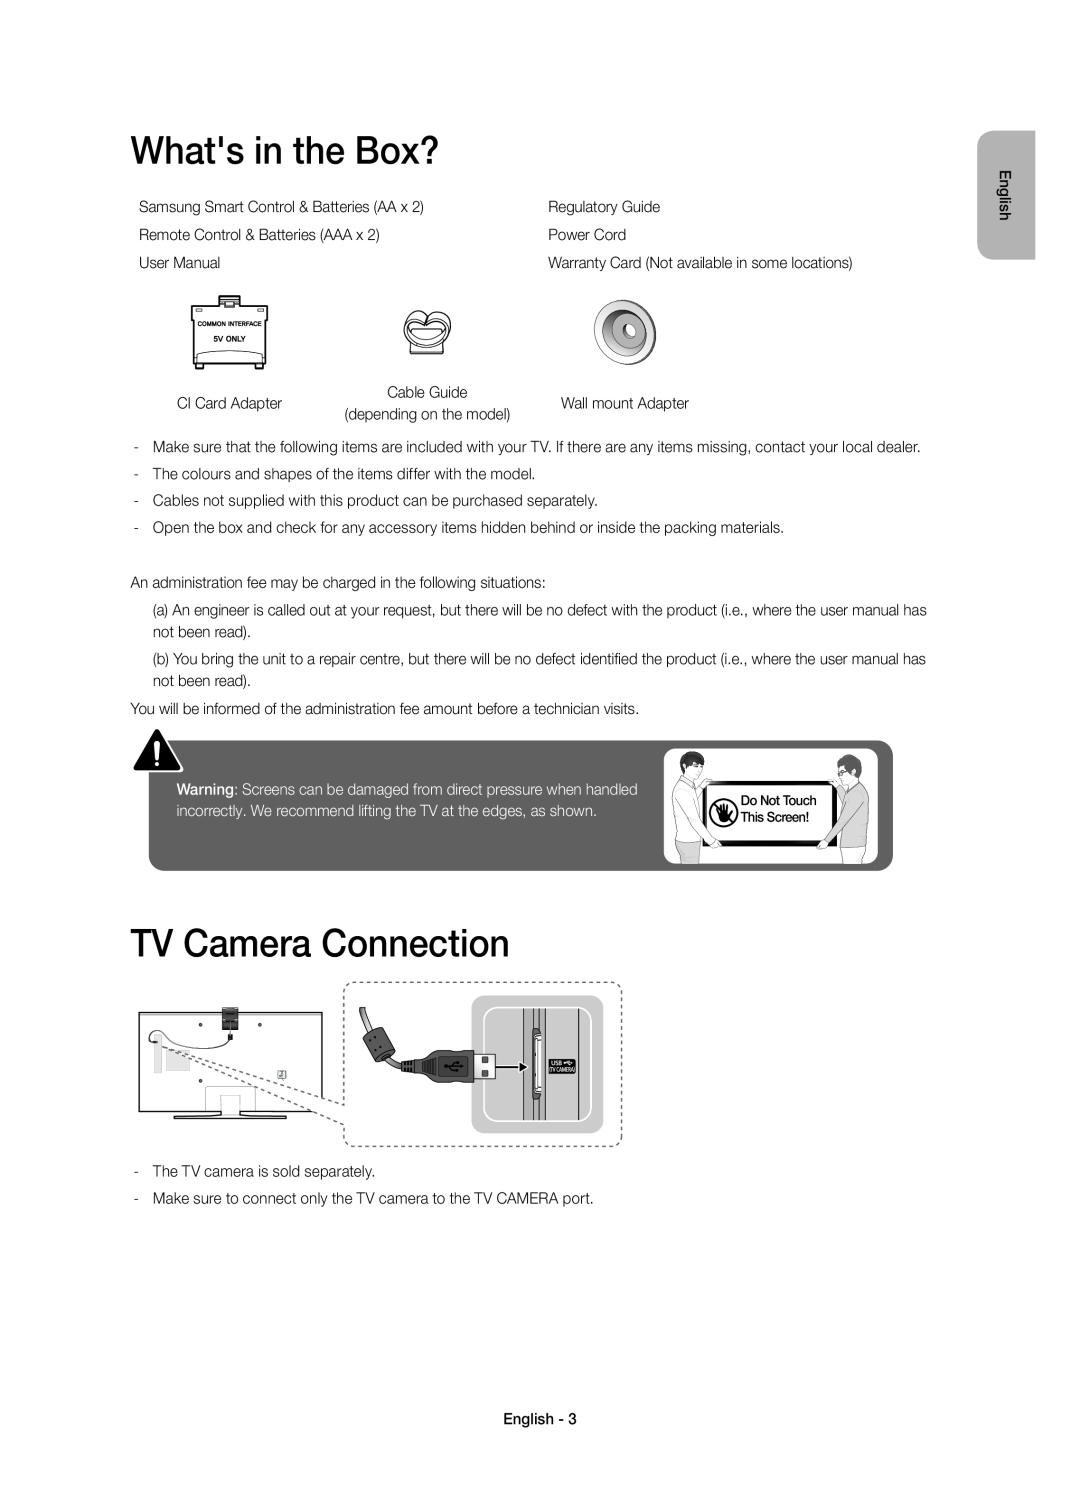 Samsung UE48JU6640UXZG, UE40JU6750UXZG, UE40JU6640UXZG, UE55JU6740SXXH manual Whats in the Box?, TV Camera Connection 